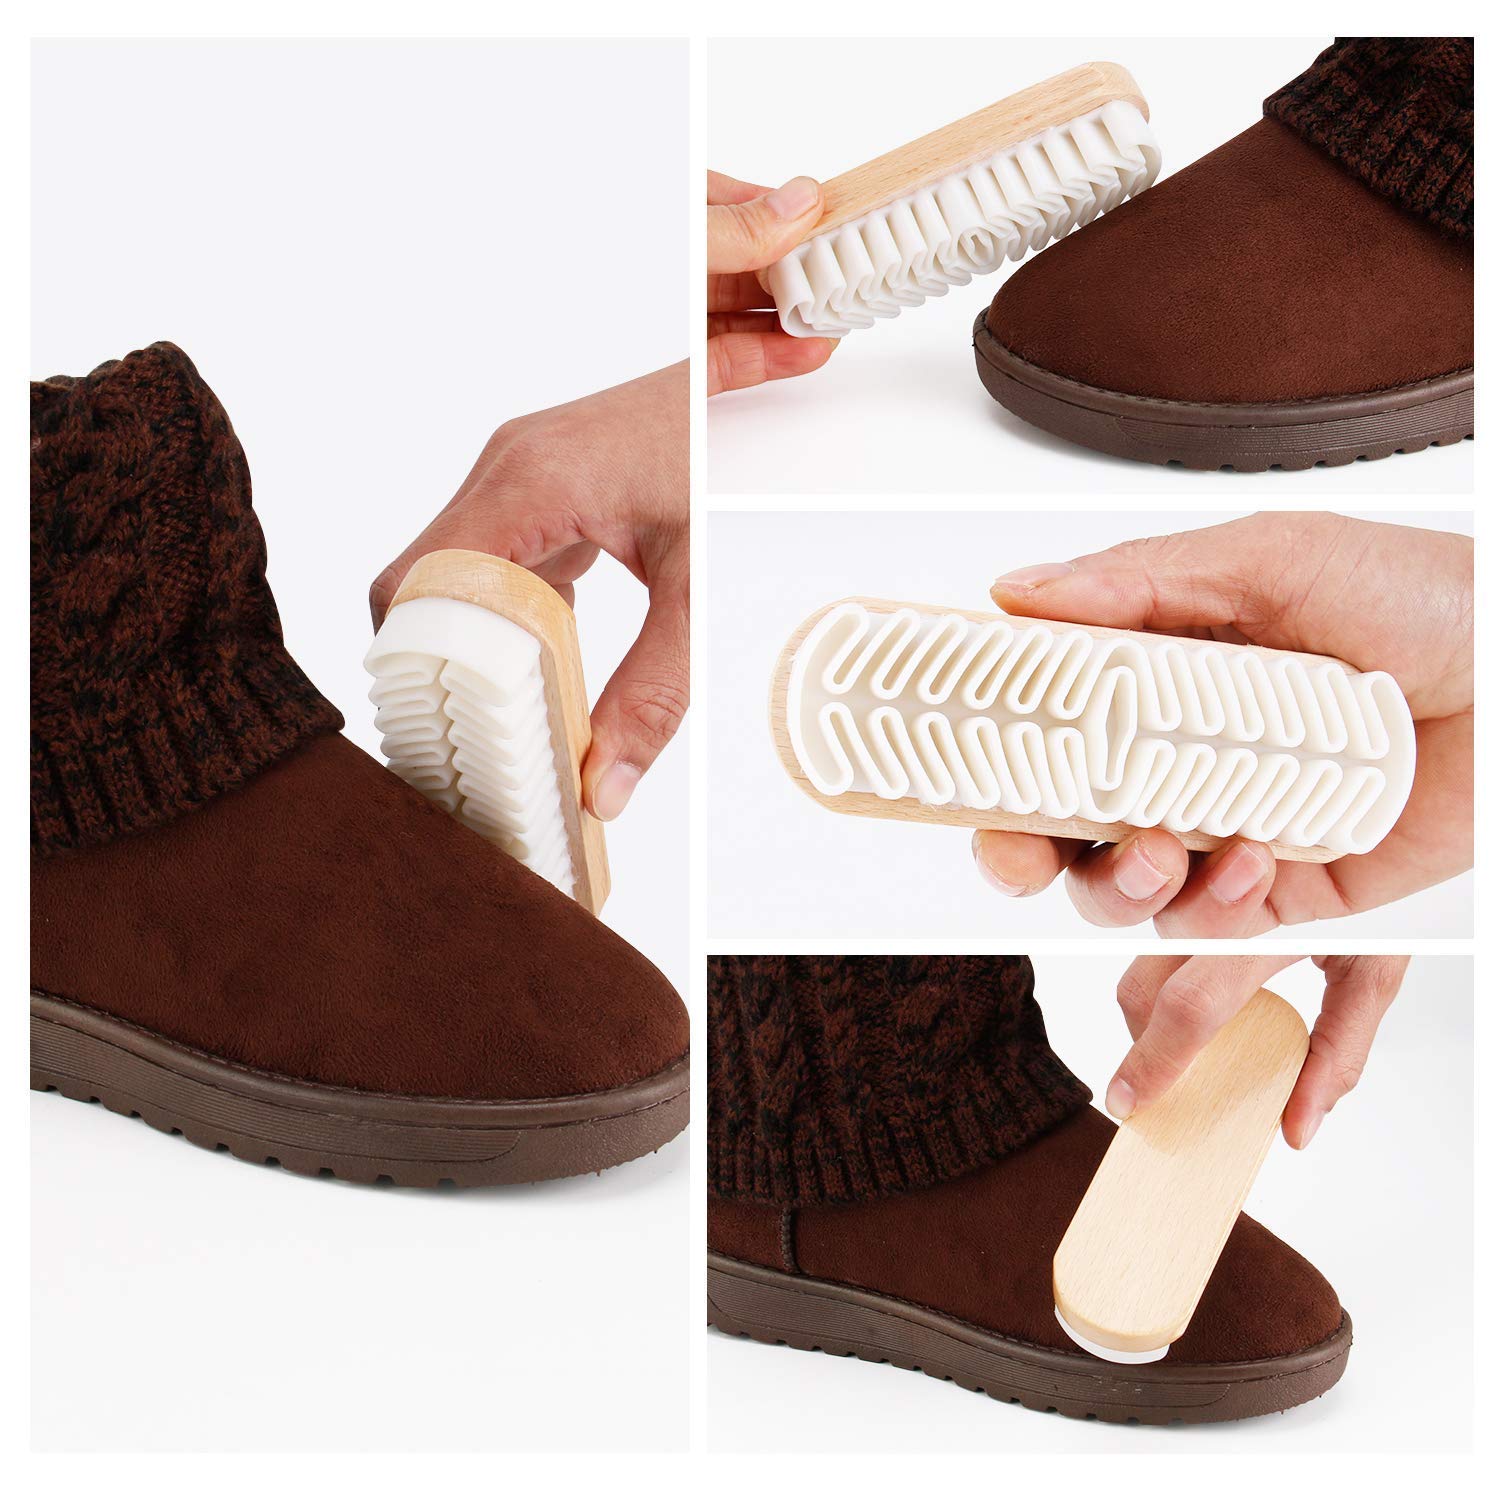 Premium Crepe Soft Shoe Brush - Expertly Crafted for Gentle and Effective Suede & Nubuck Cleaning (Handcrafted Shoe Brush)